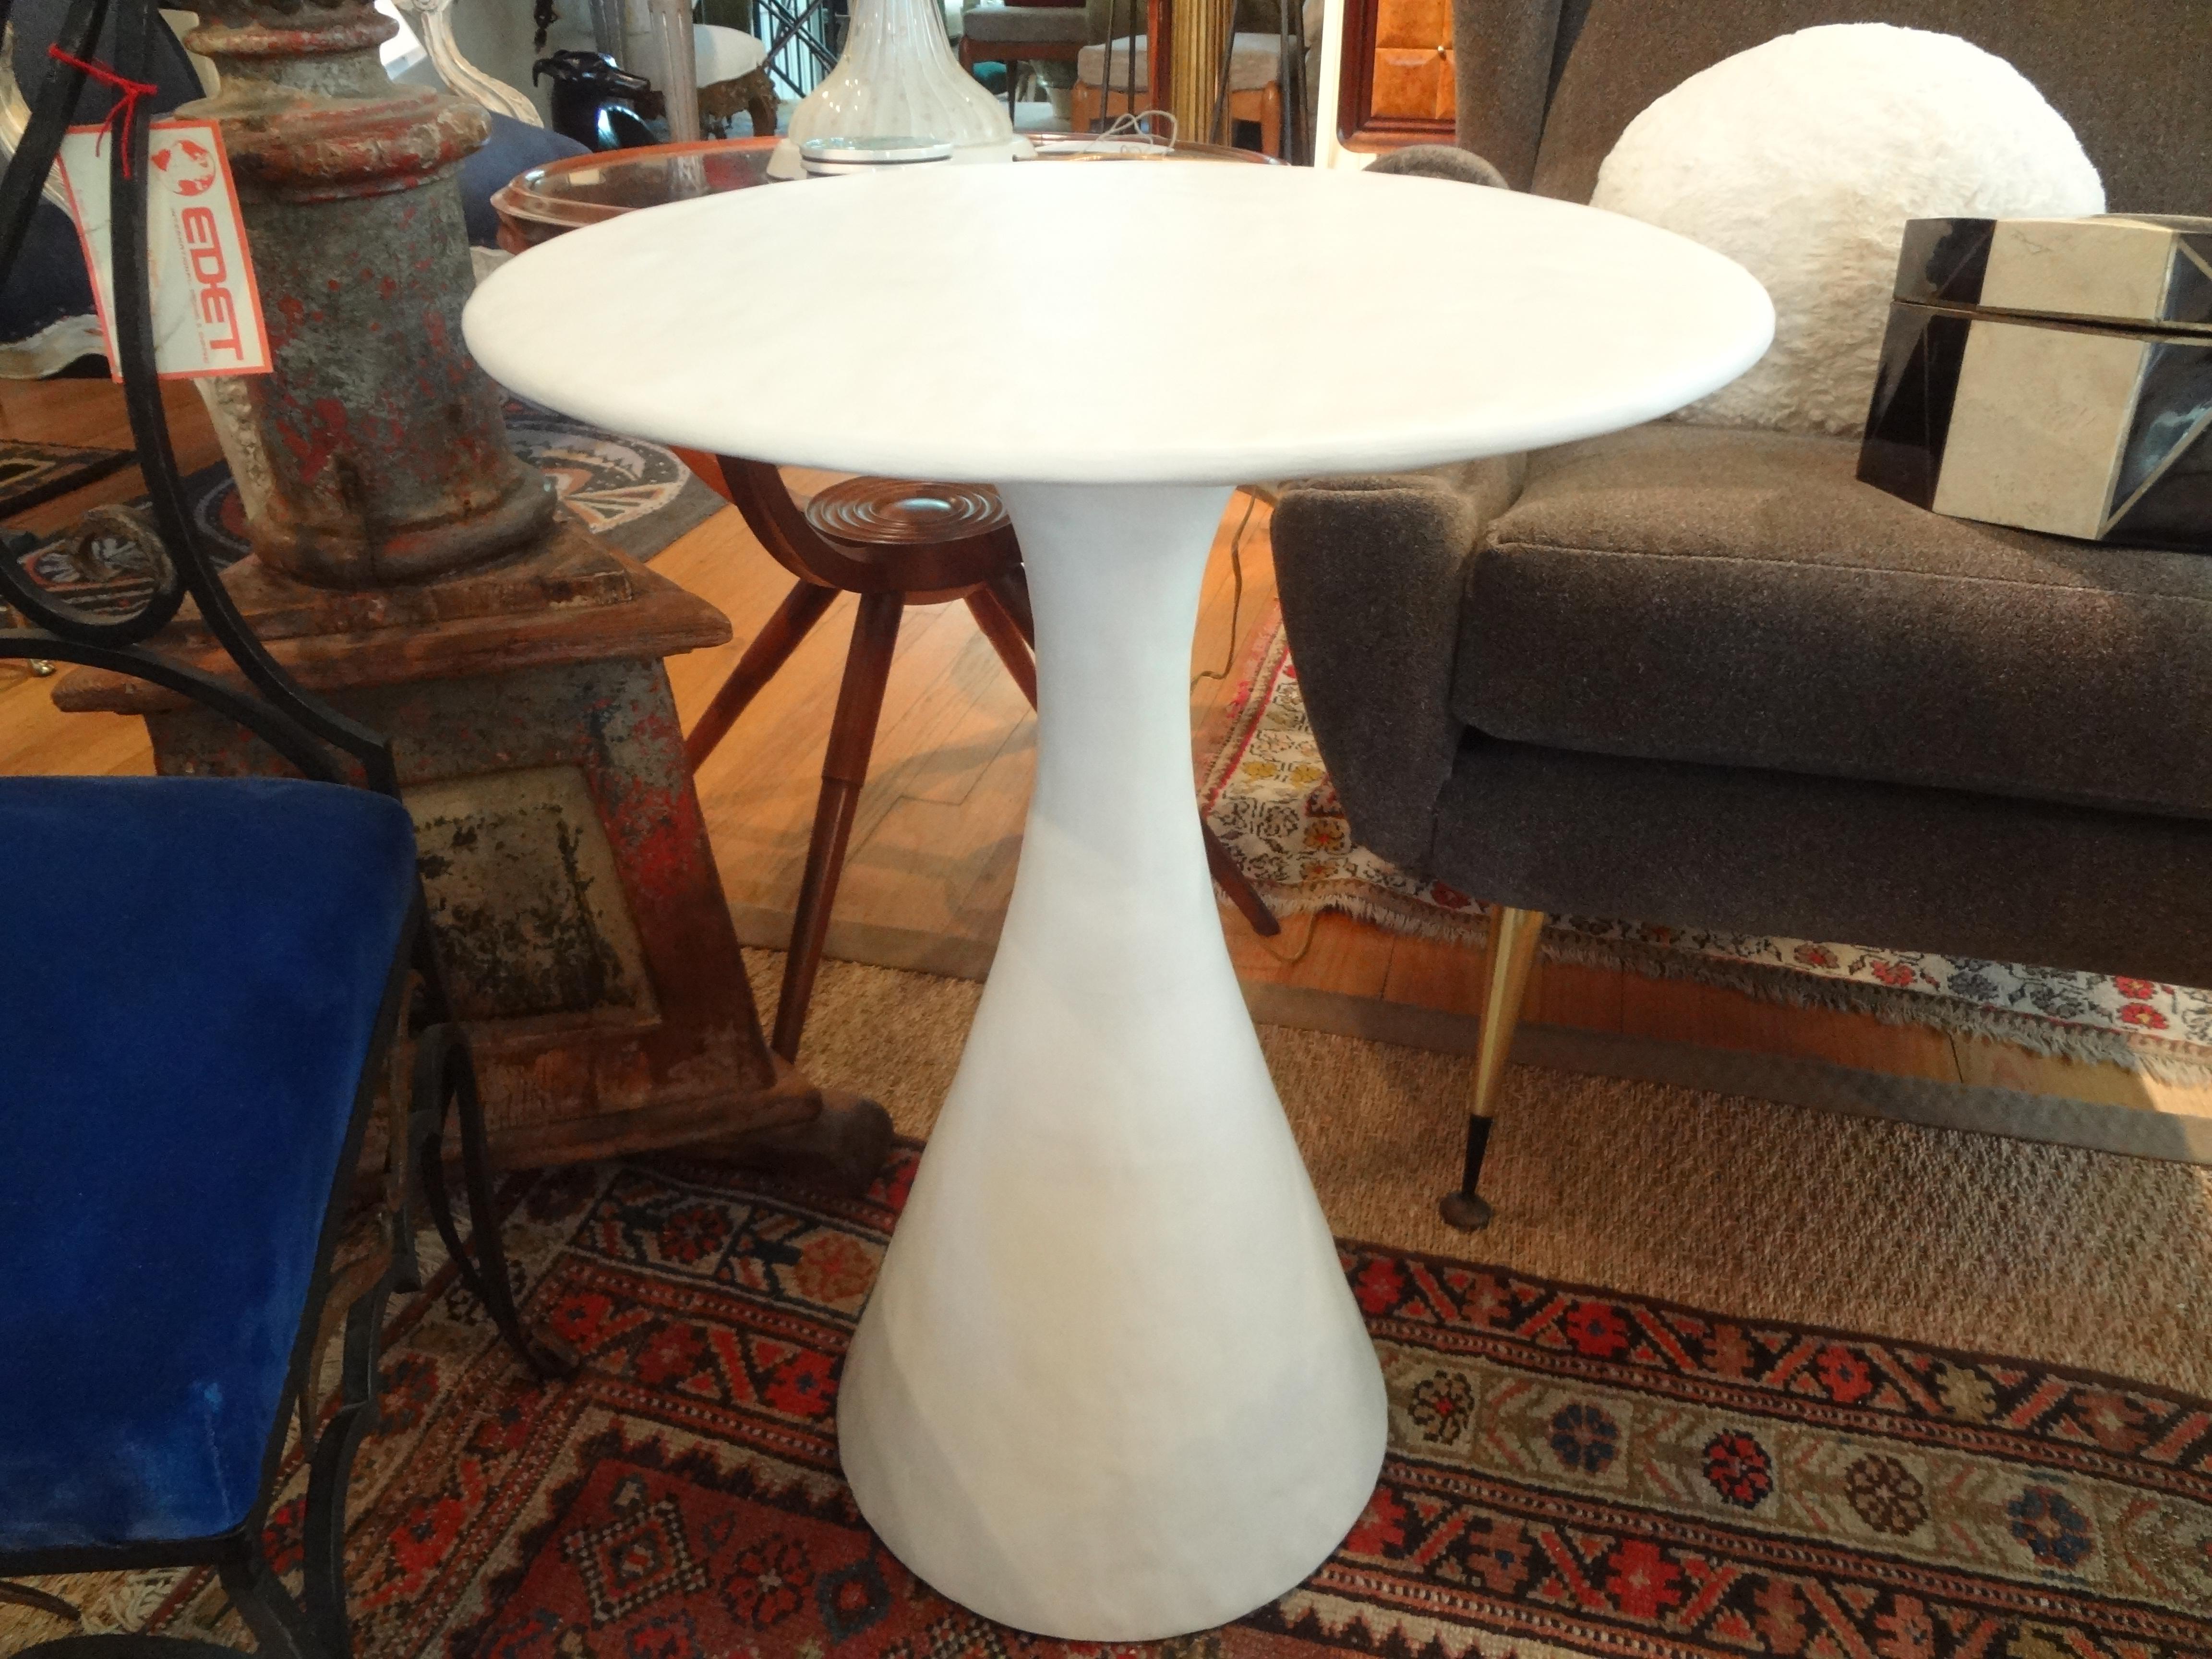 Stunning midcentury plaster table, side table, drink table, cigarette table or gueridon in the style of John Dickinson, Sirmos, Serge Roche, Dorothy Draper, Frances Elkins or Steve Chase. This great table would work well in a variety of interiors.